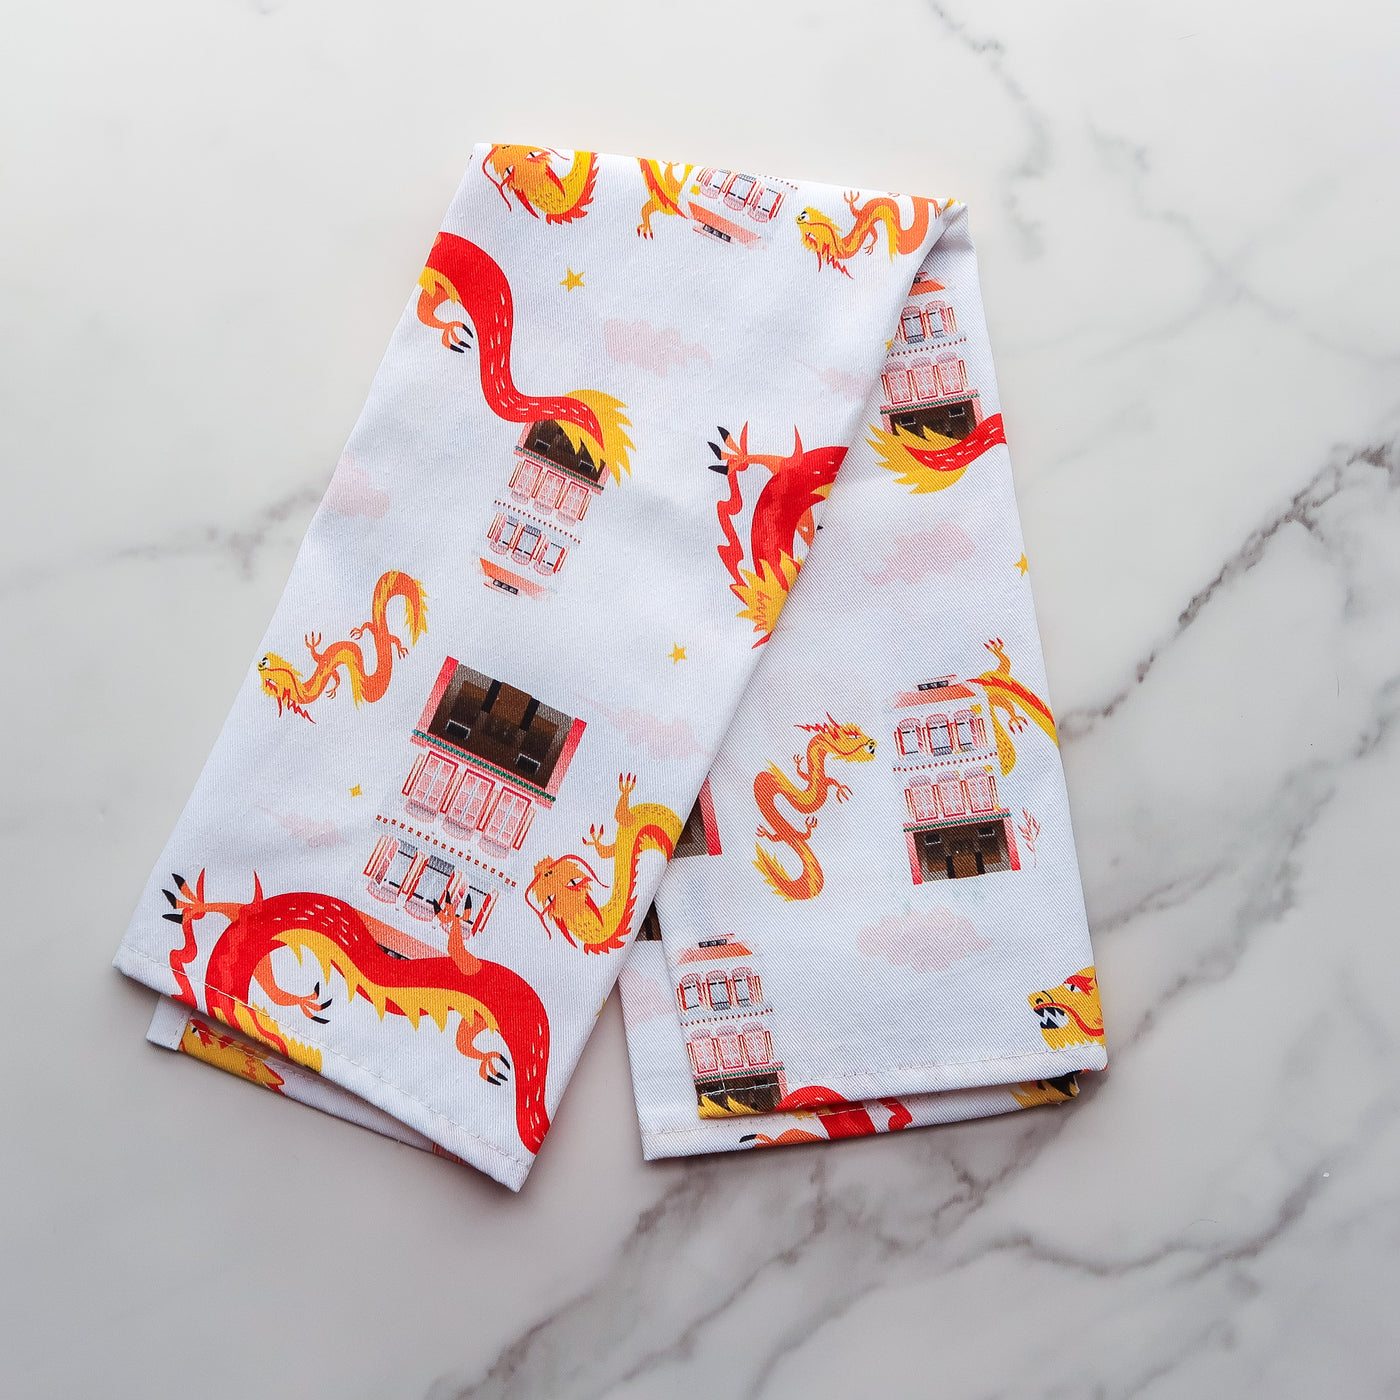 Singapore Shophouse CNY Year of the Dragon Tea Towel - Red